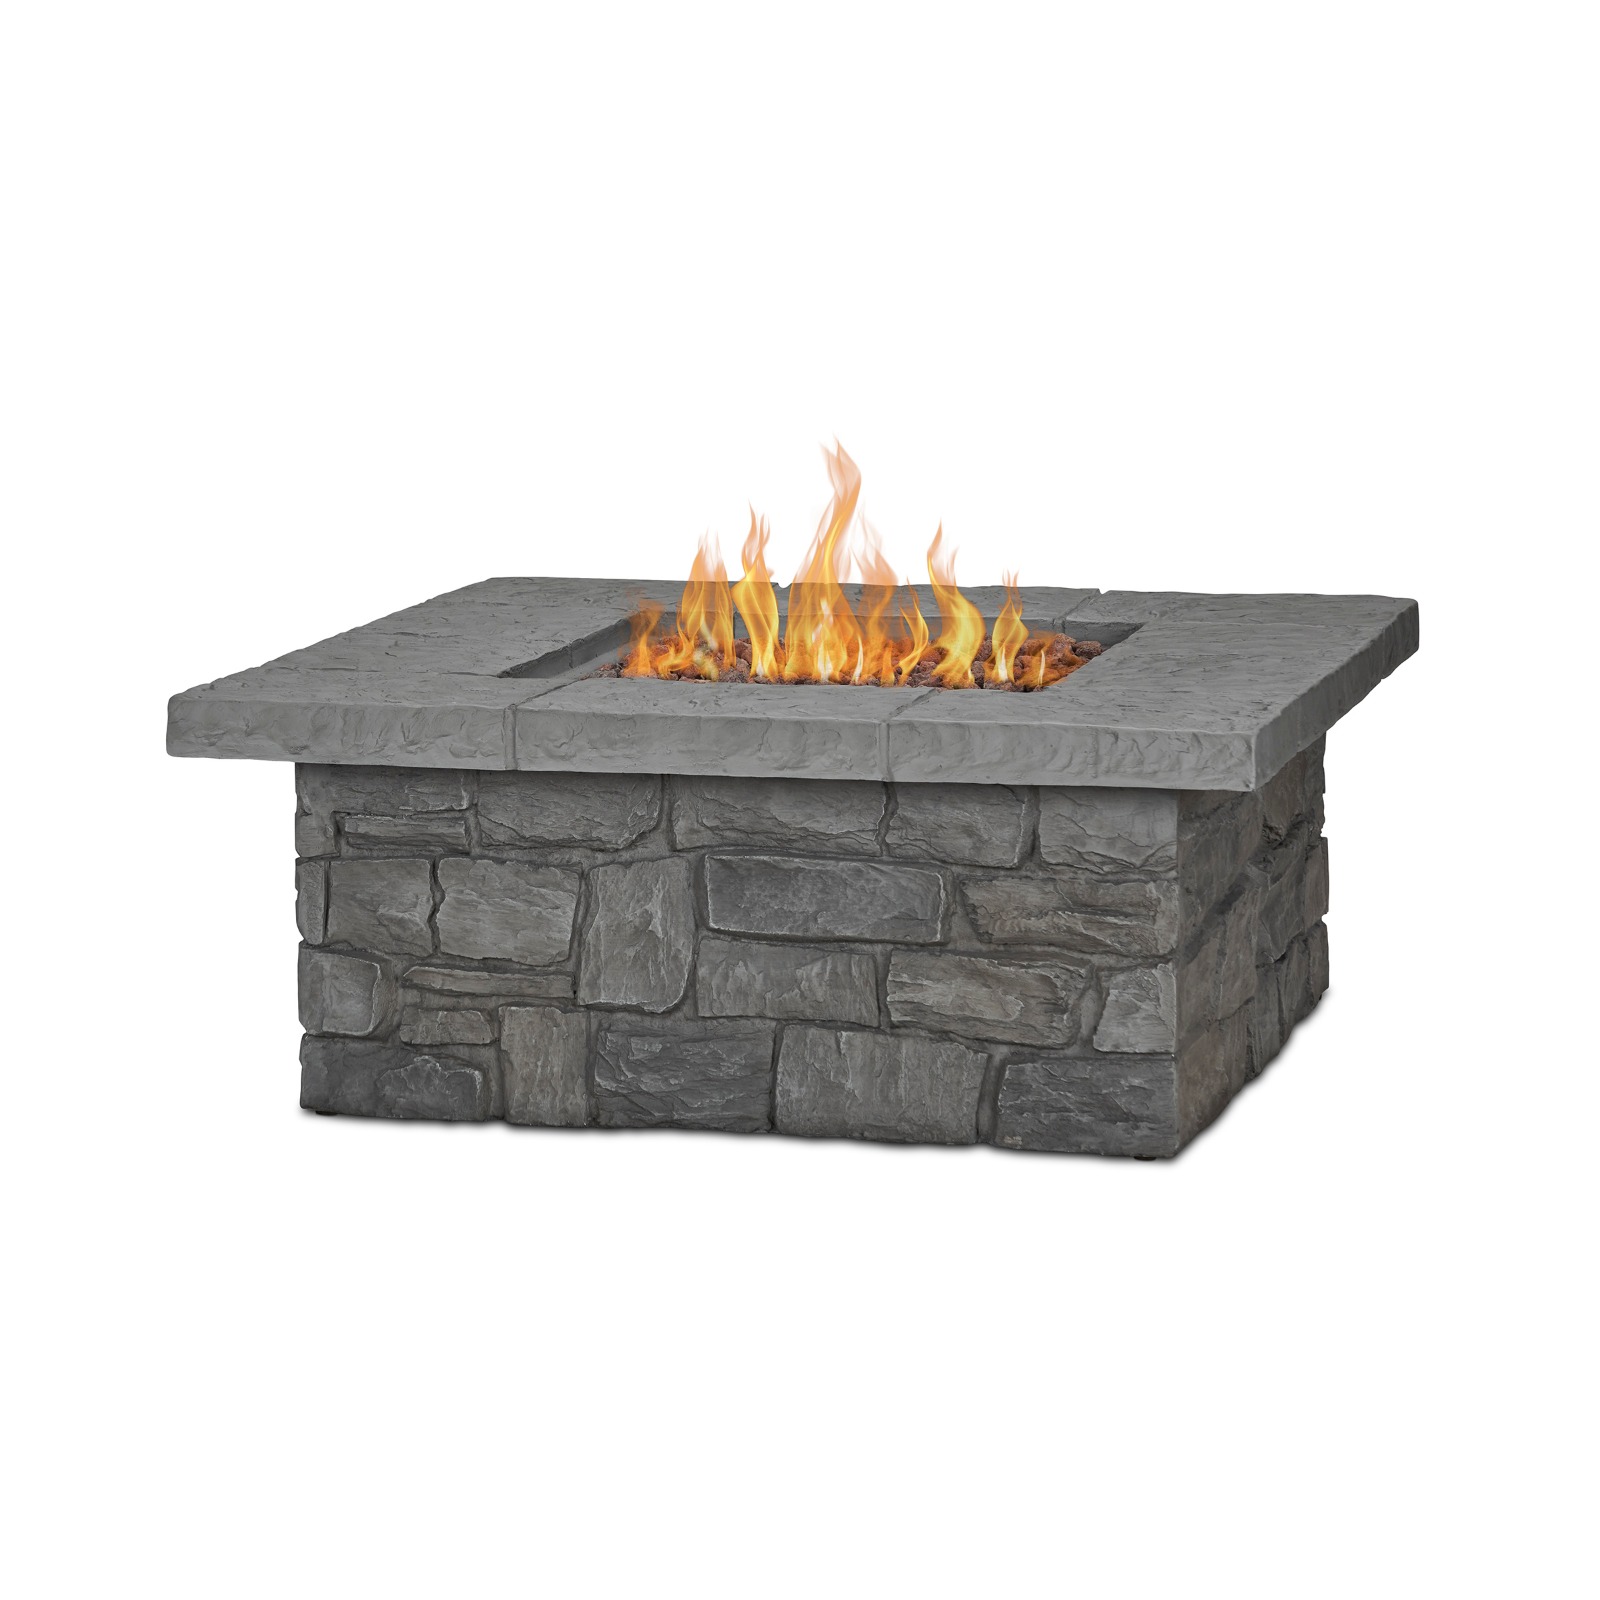 Sedona Square Propane Fire Table with NG Conversion Kit gray on white